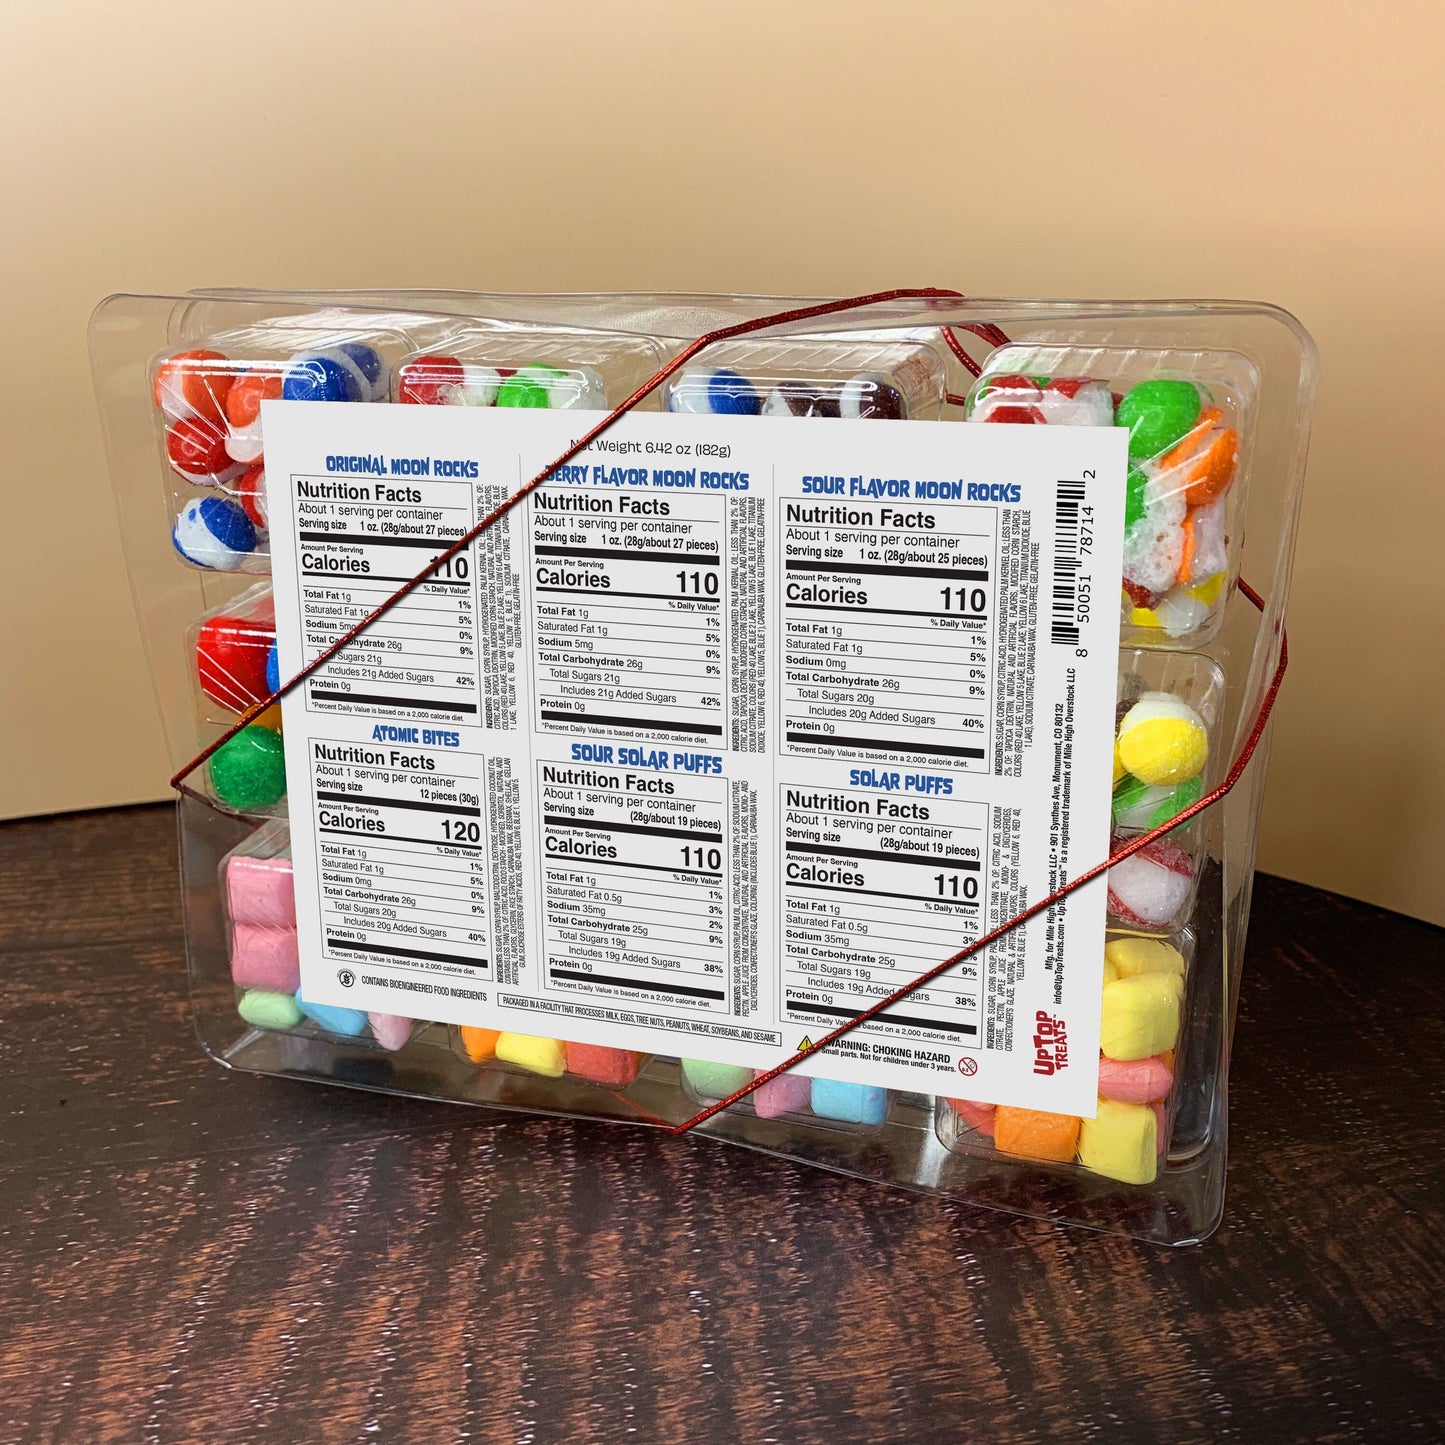 Happy Birthday themed Freeze Dried Candy Tackle Box - 6.42oz